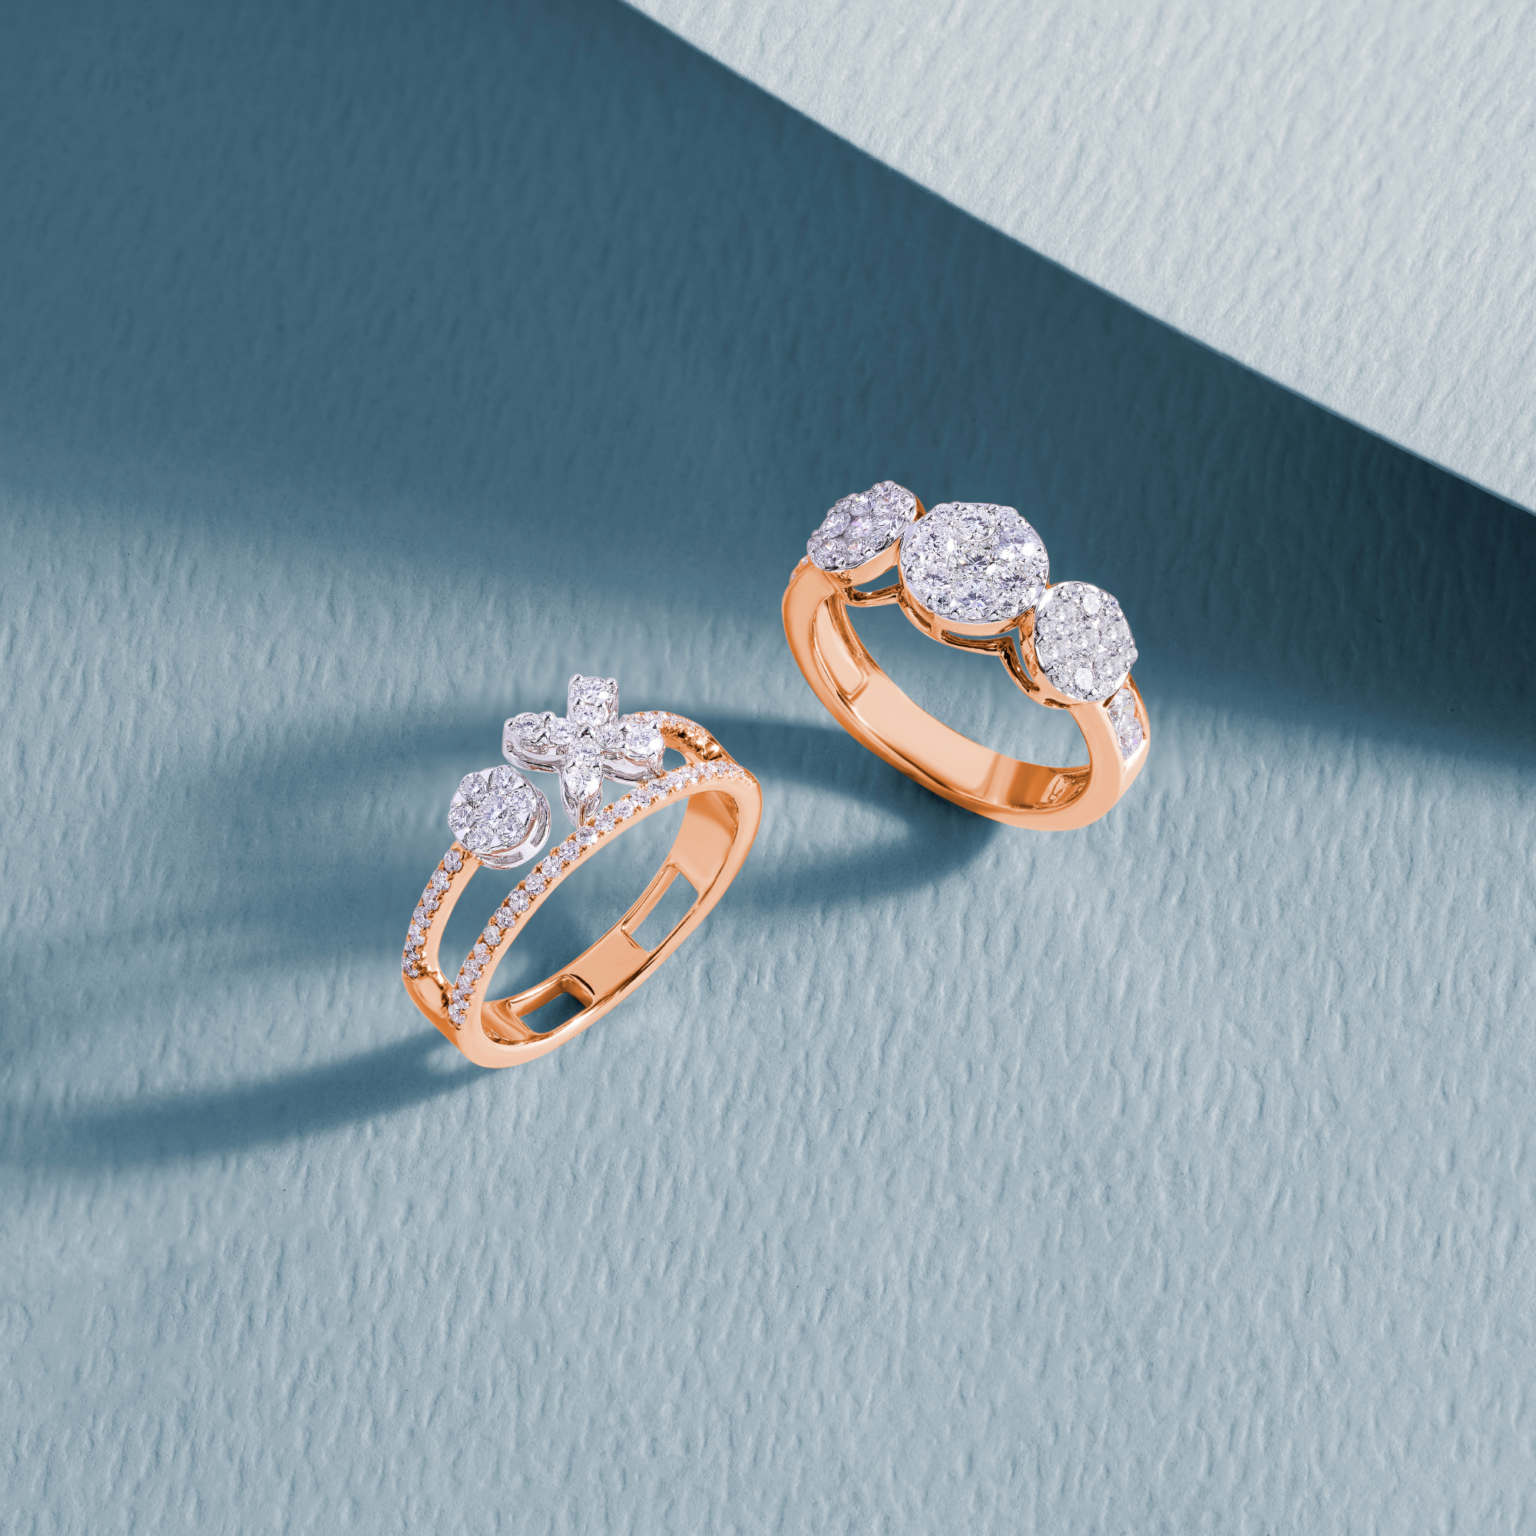 A Match Made In Heaven Celebrating The Timeless Beauty Of Petite Pave